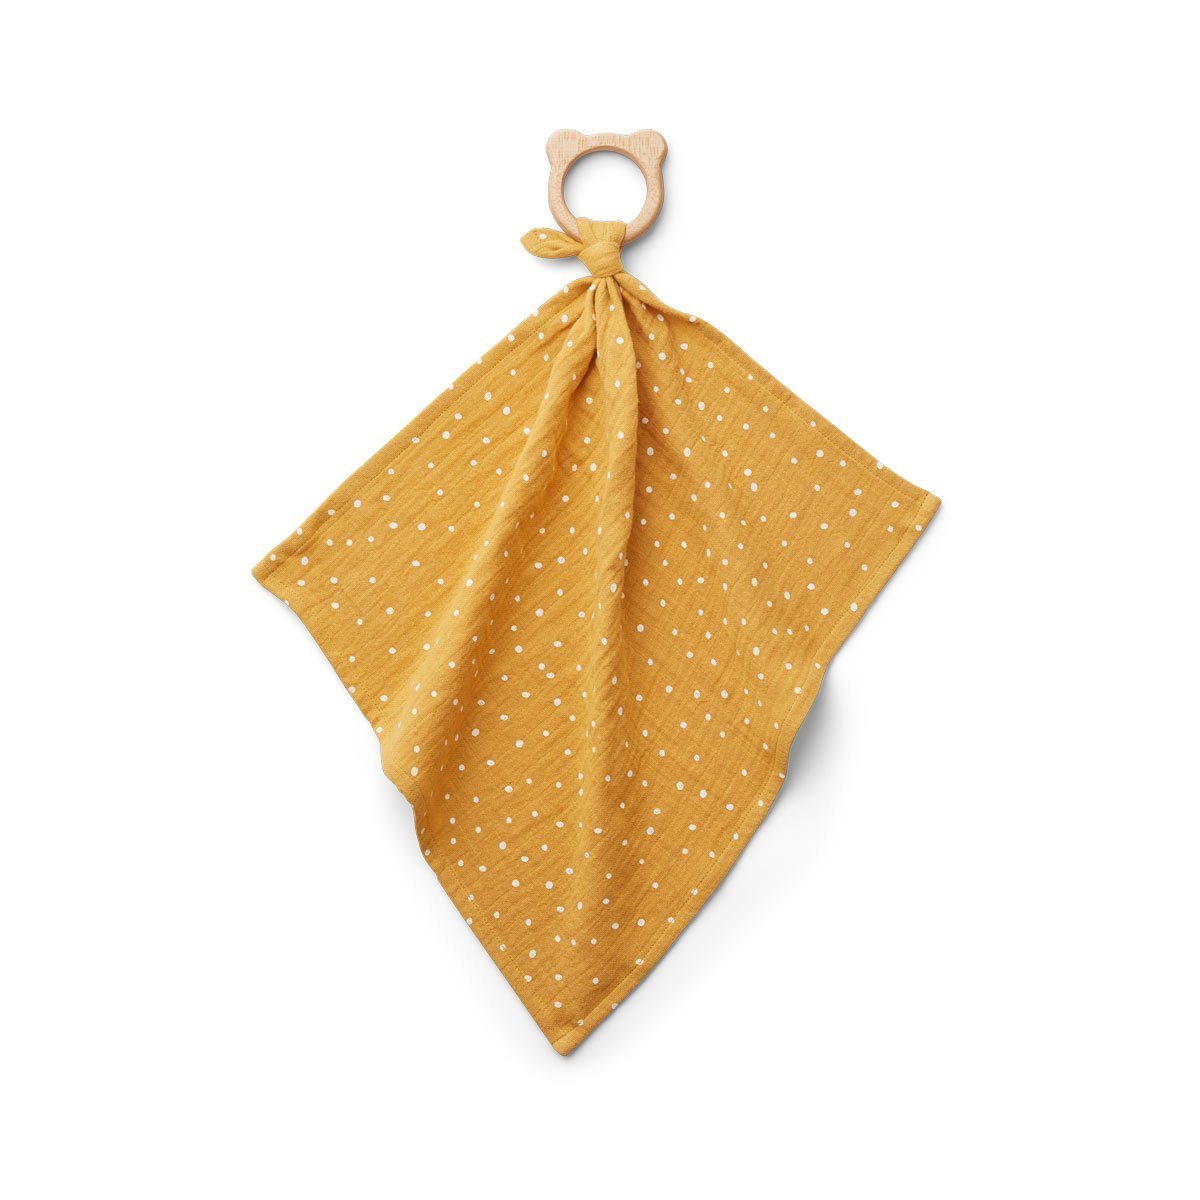 Liewood Dines Teether Cuddle Cloth - Confetti Yellow - Scandibørn